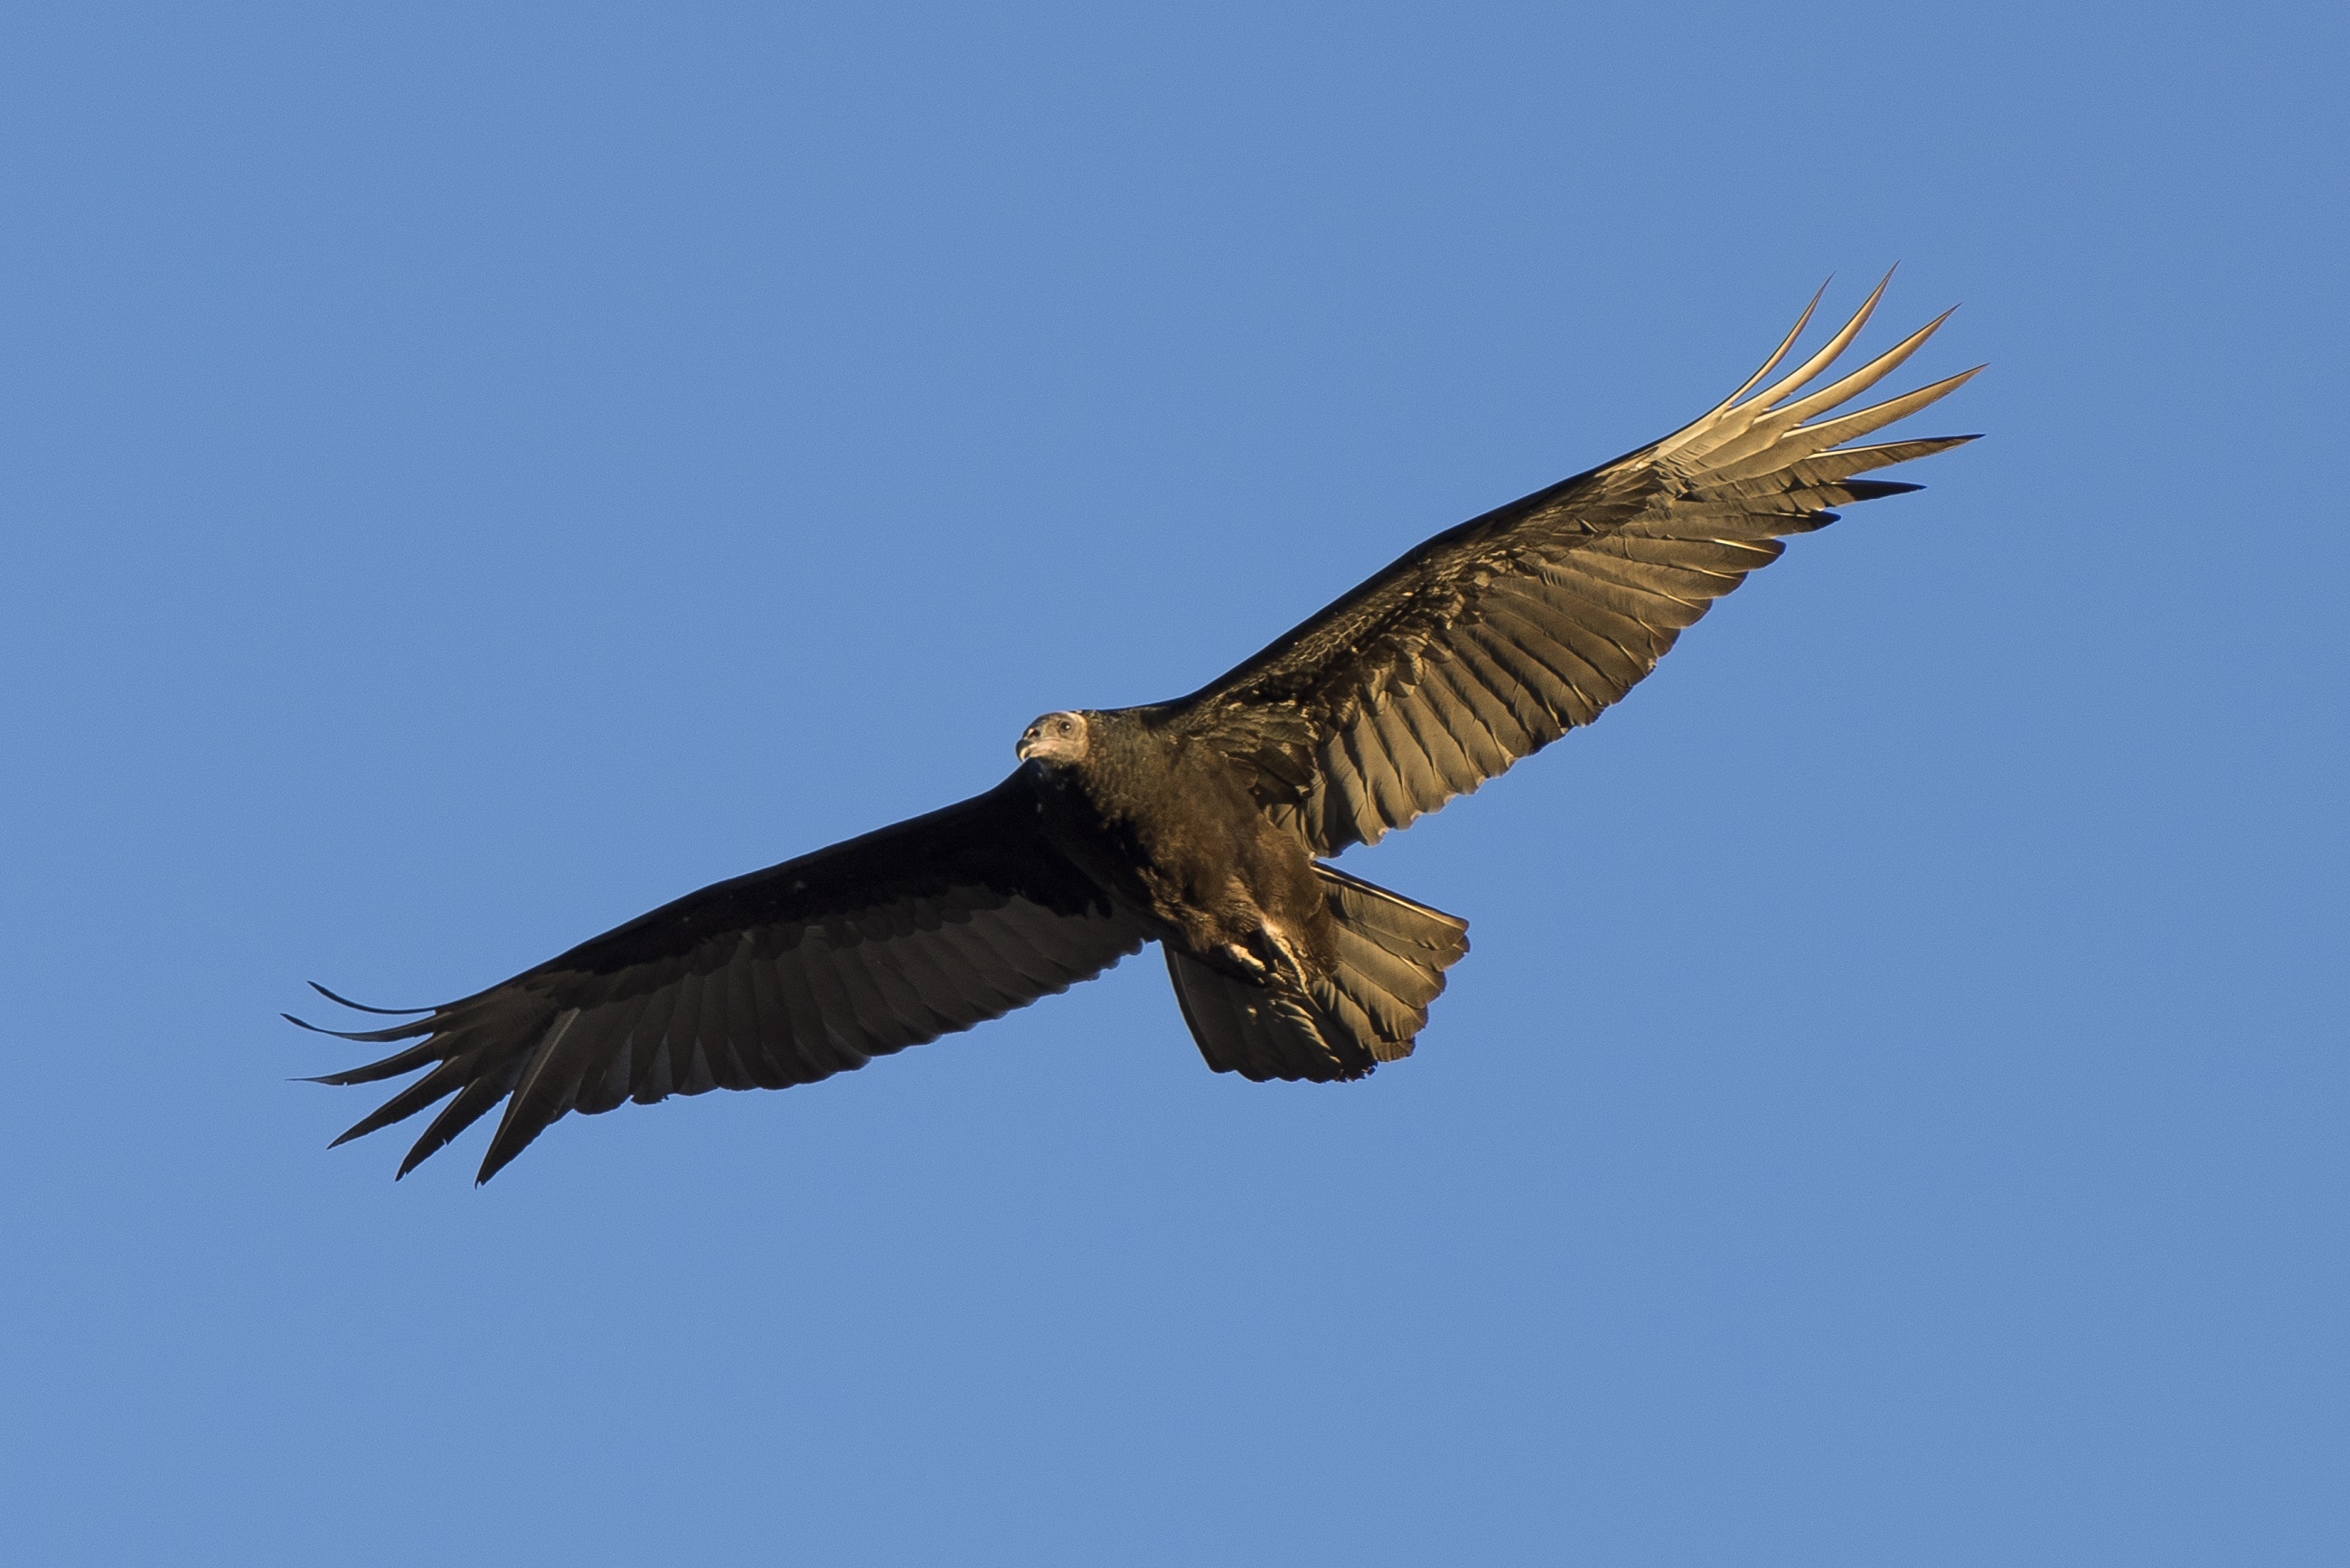 black and brown feathered eagle on sky during daytime